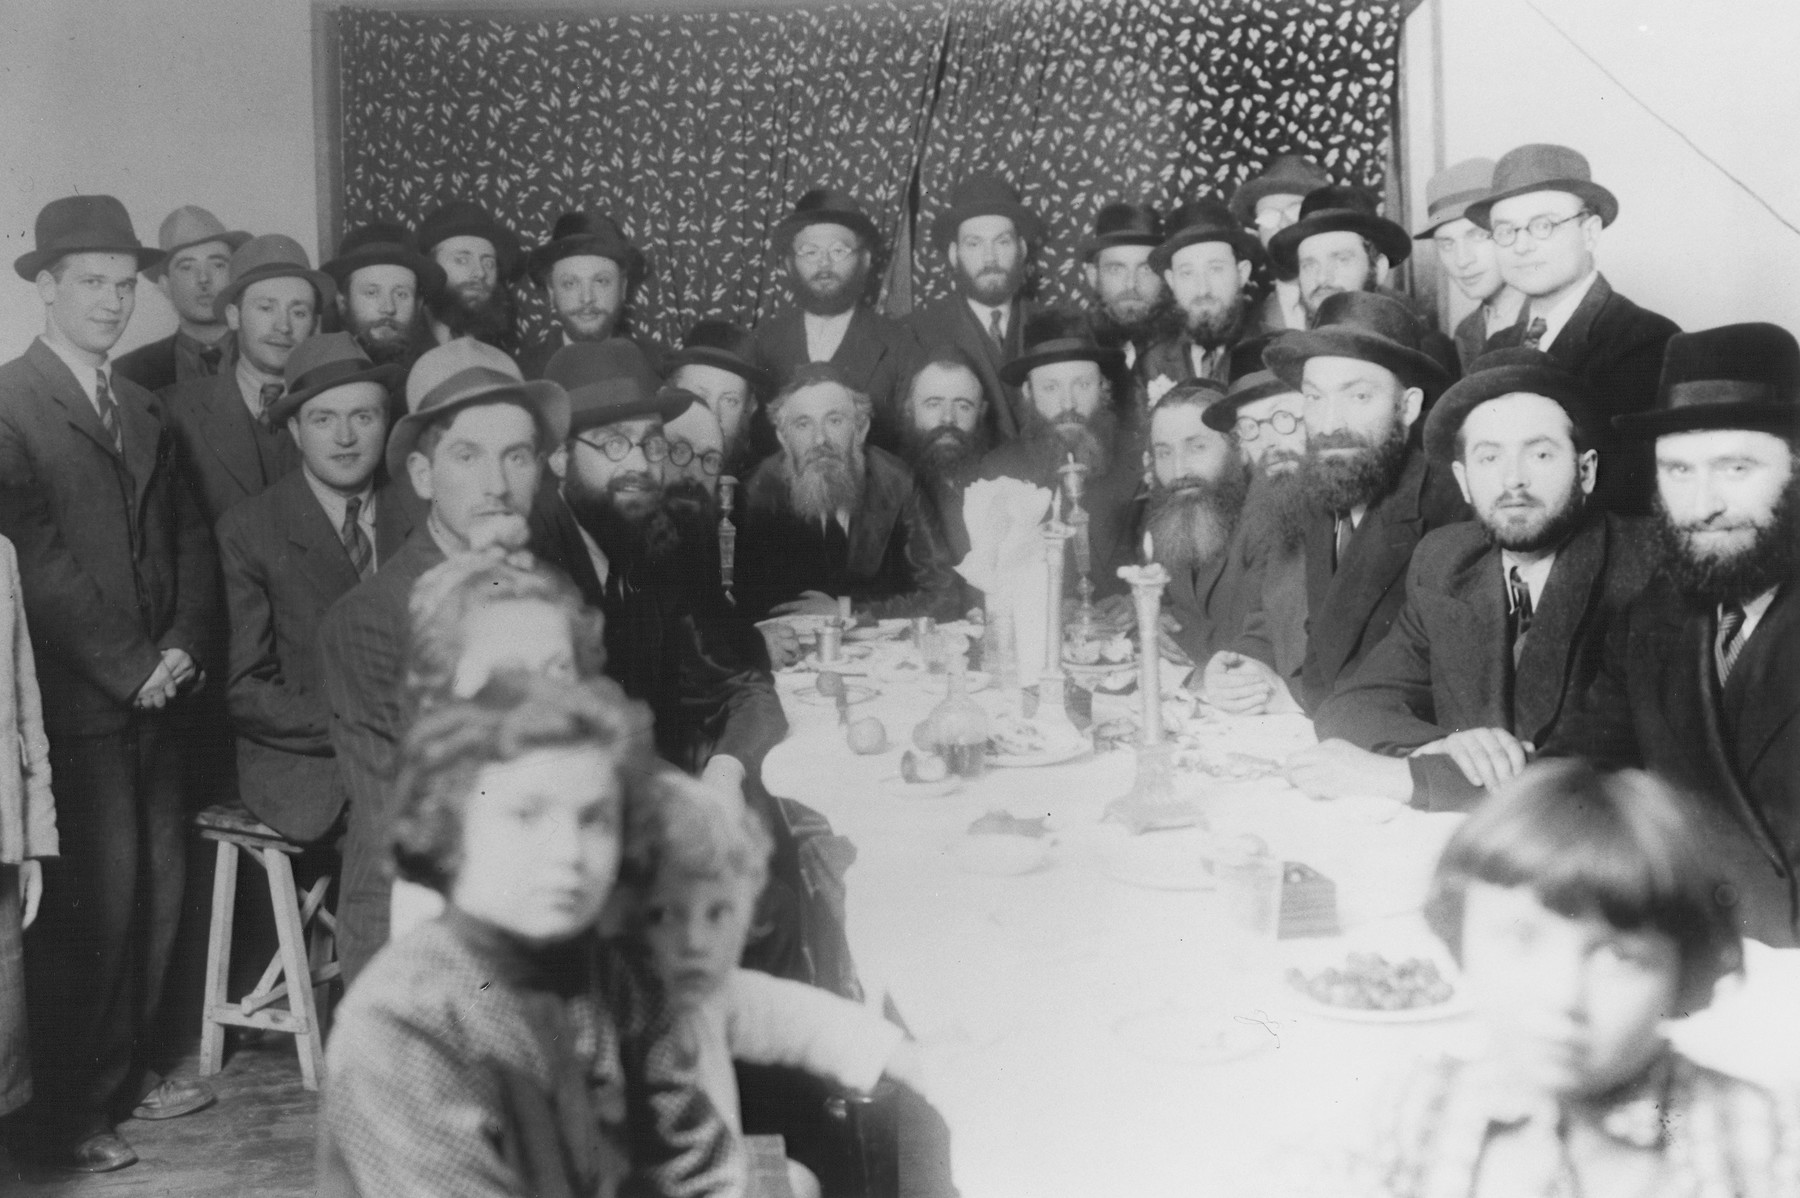 Group portrait of religious Jewish refugees from Poland at a dinner in Shanghai.

Among those pictured are Rabbi Walkin and his daughters.